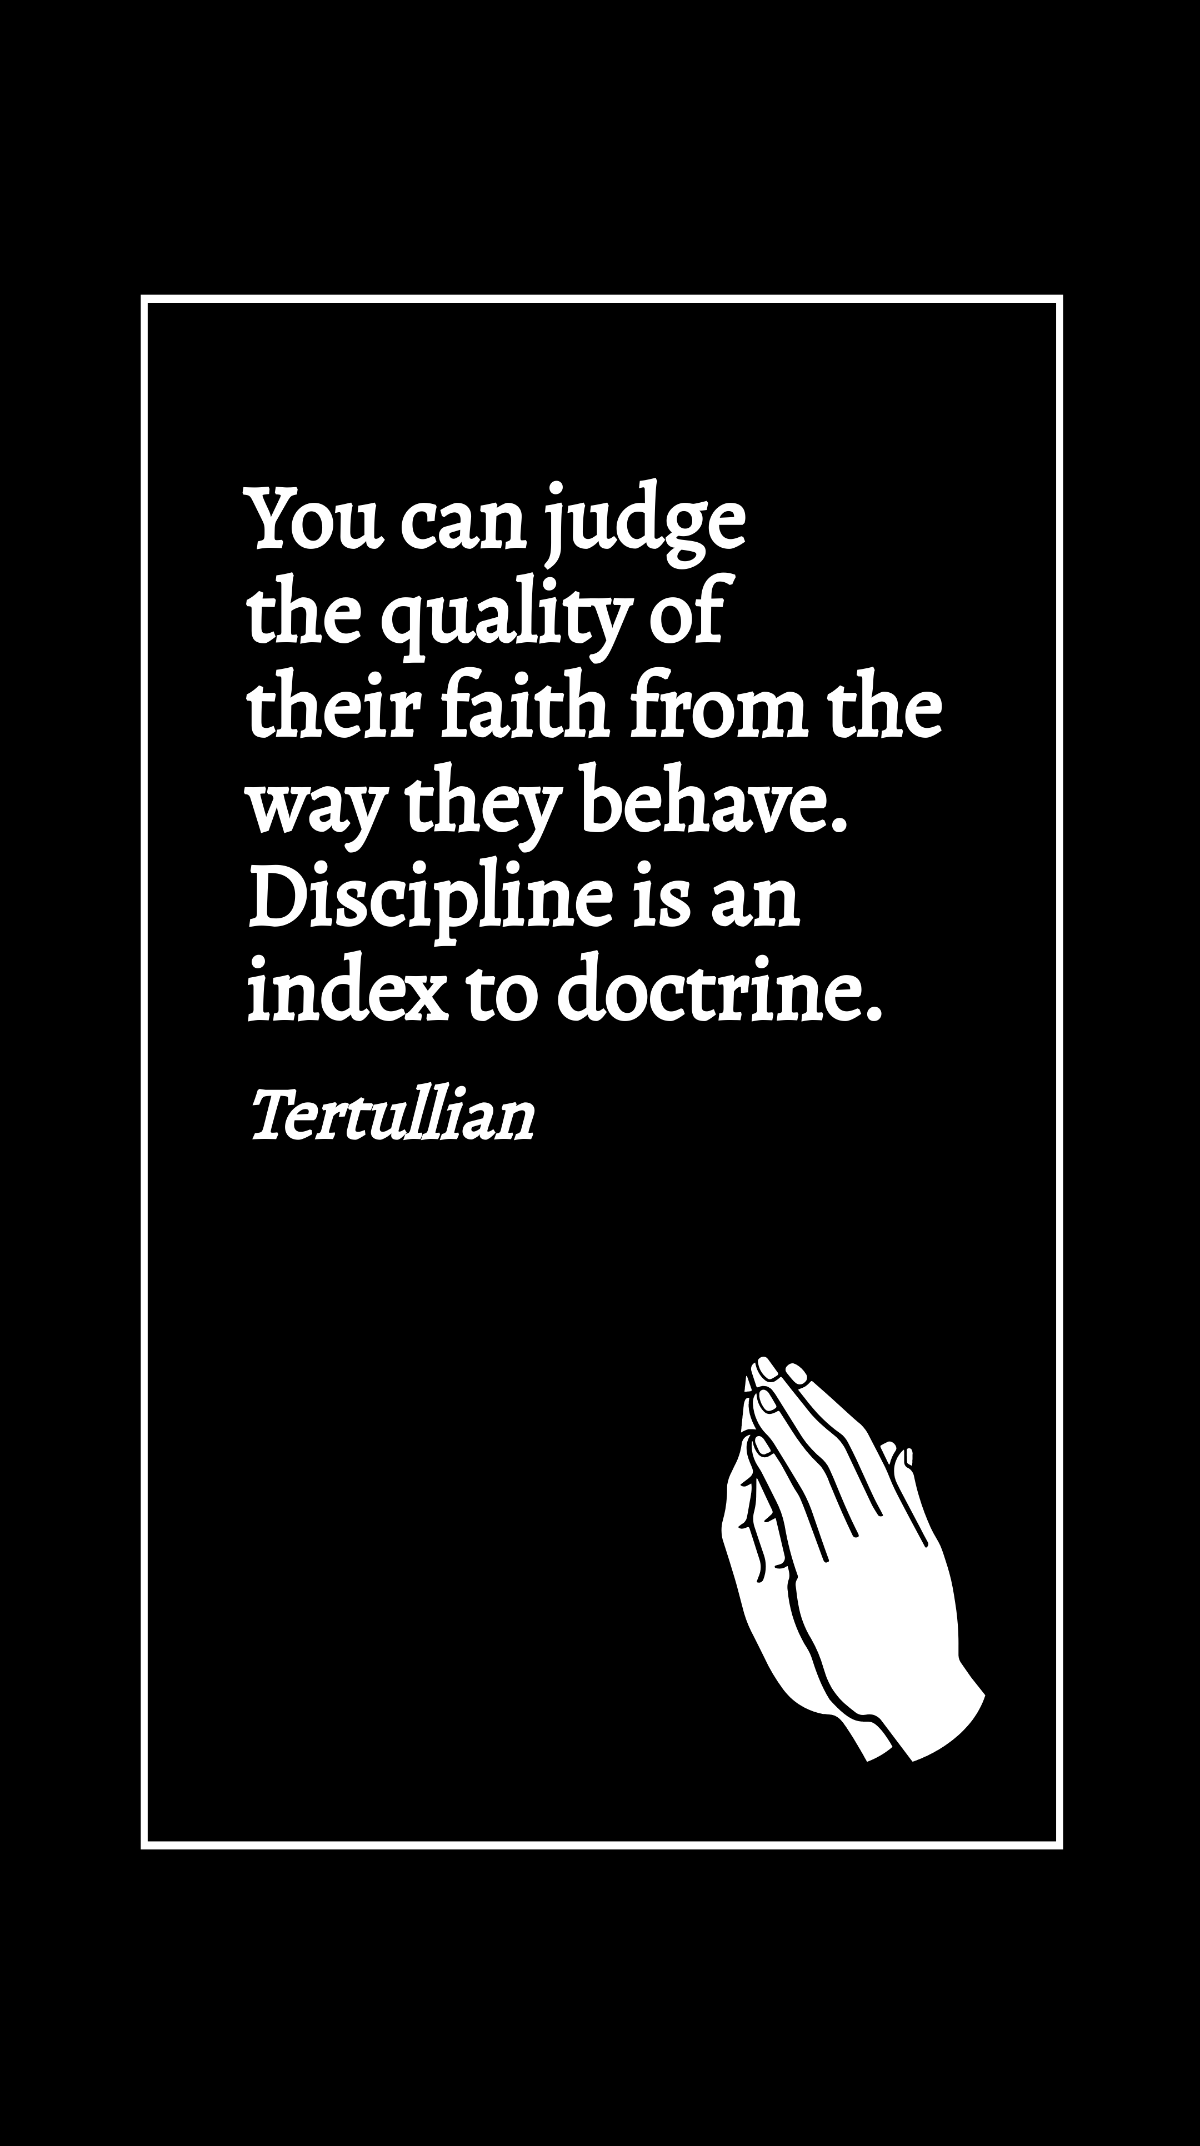 Free Tertullian - You can judge the quality of their faith from the way they behave. Discipline is an index to doctrine. Template